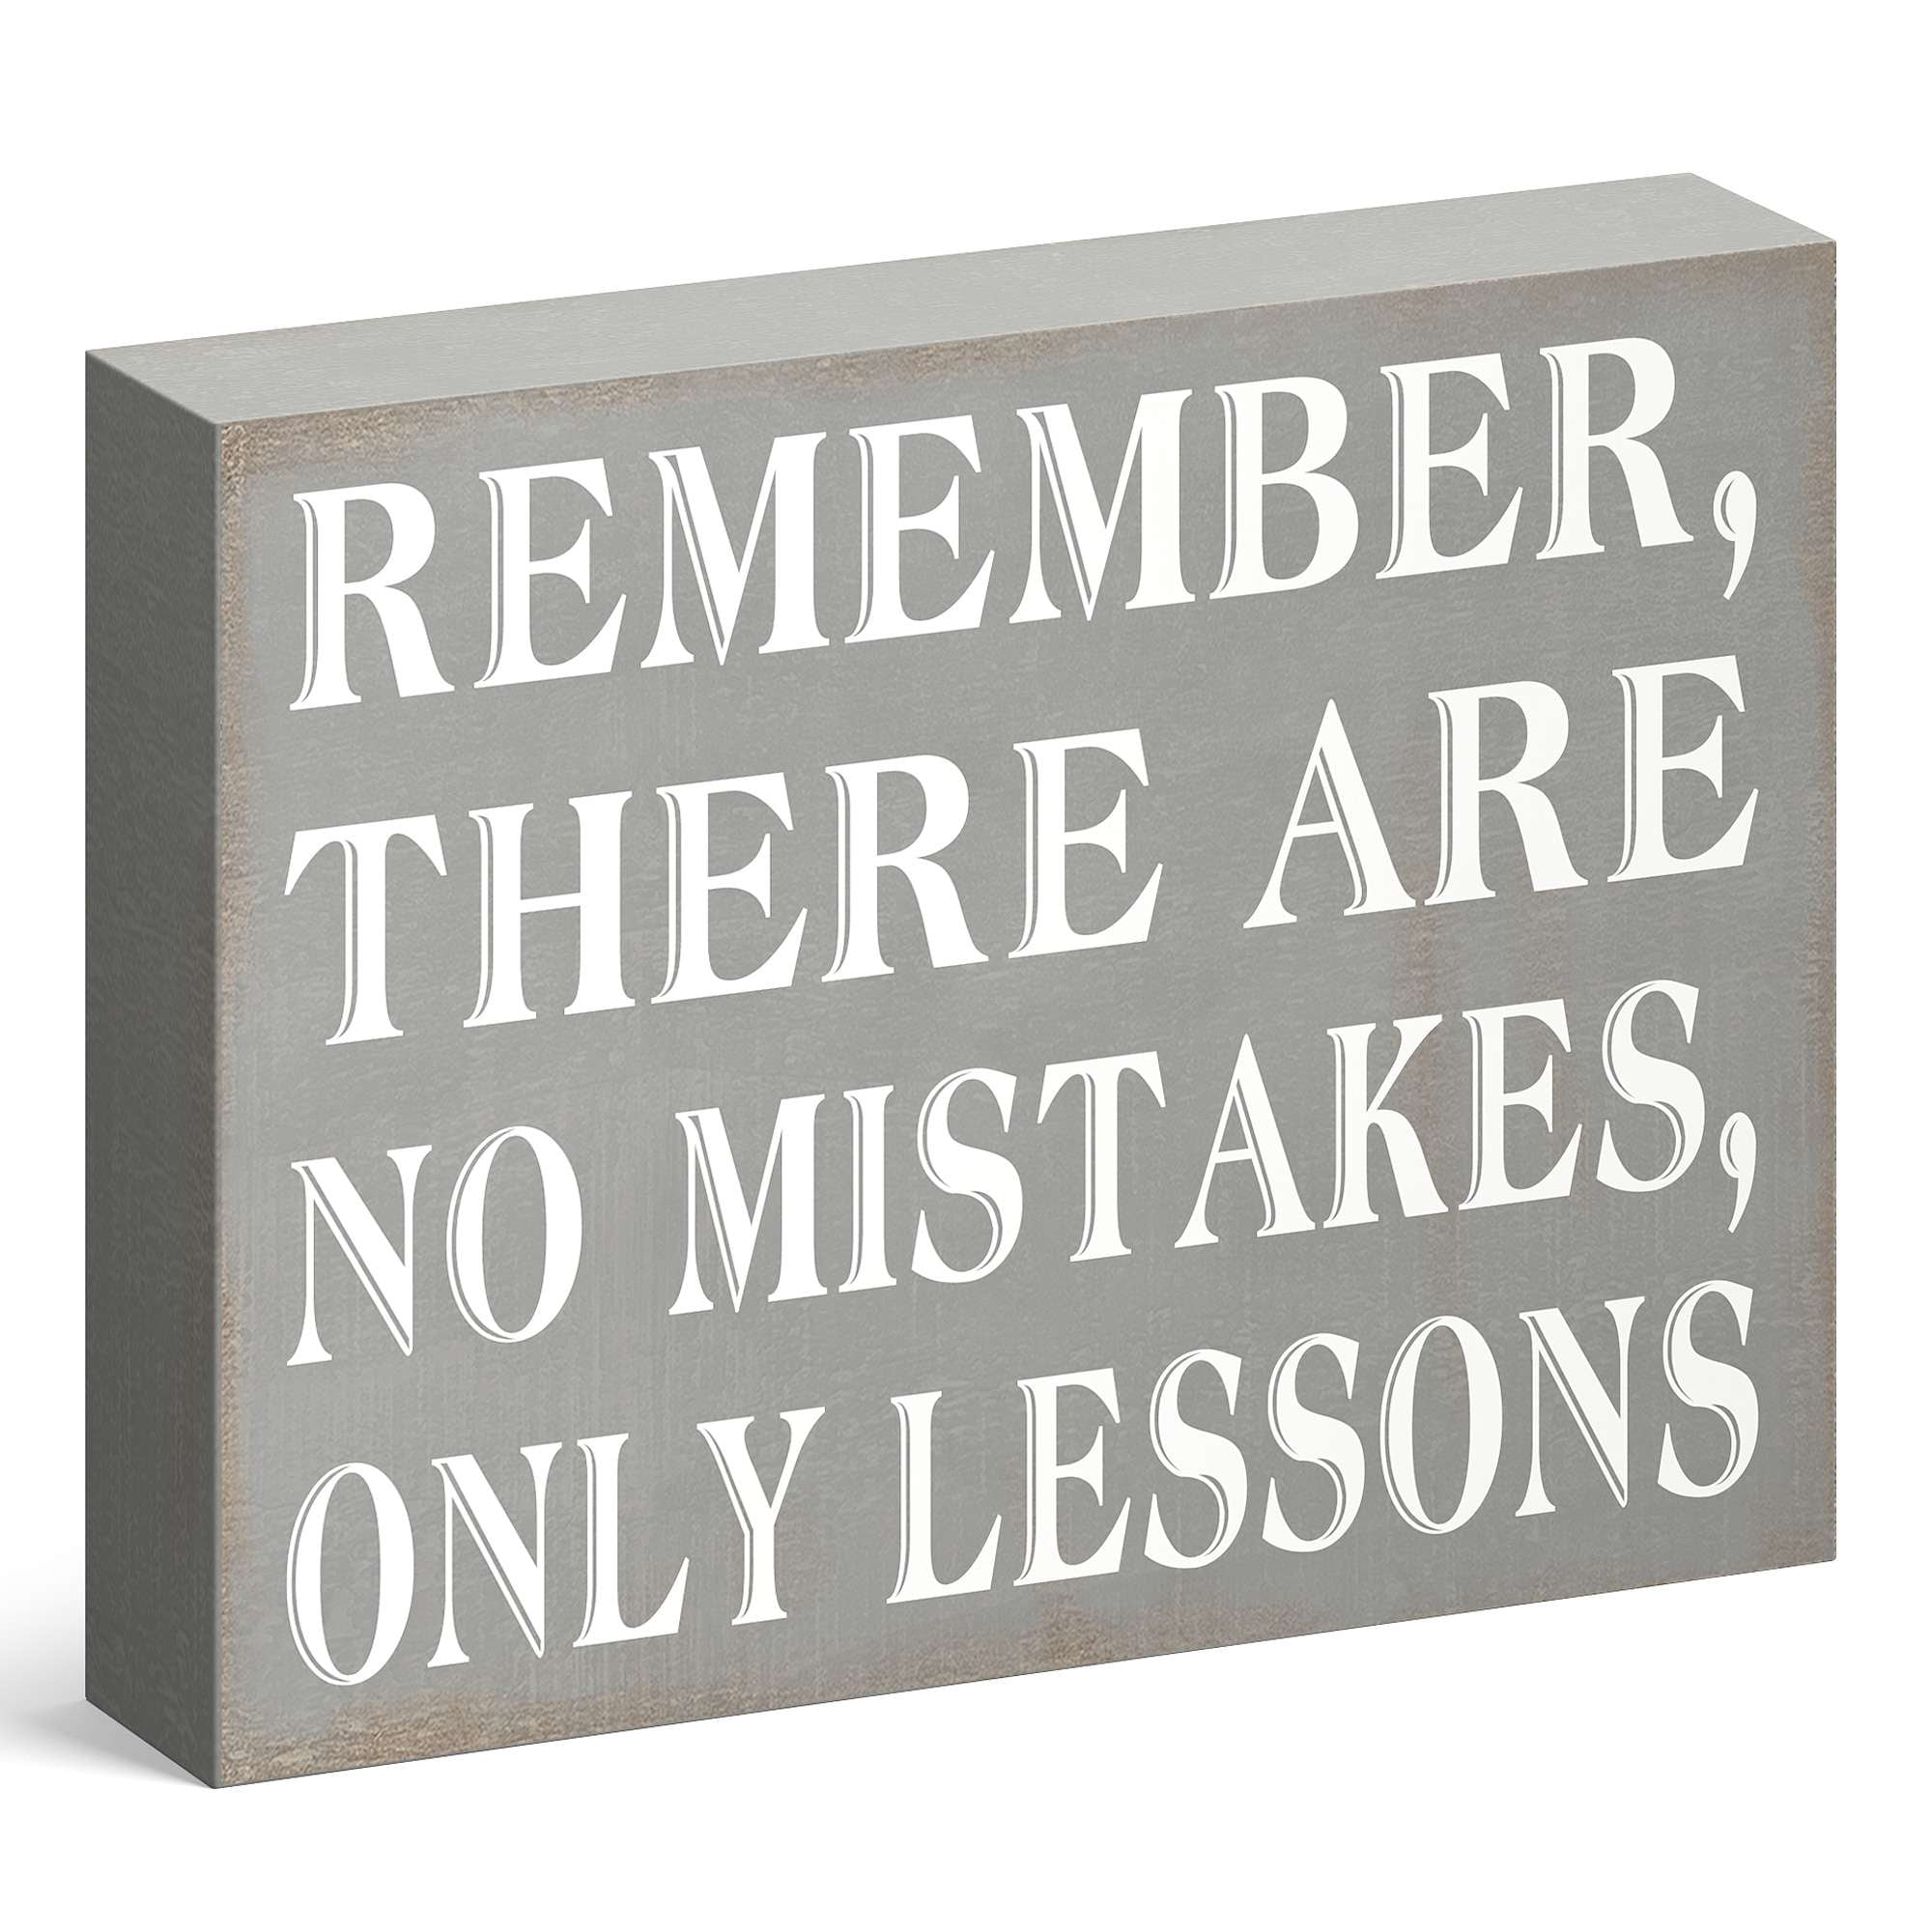 Barnyard Designs \'No Mistakes Only Lessons\' Wooden Box Sign ...